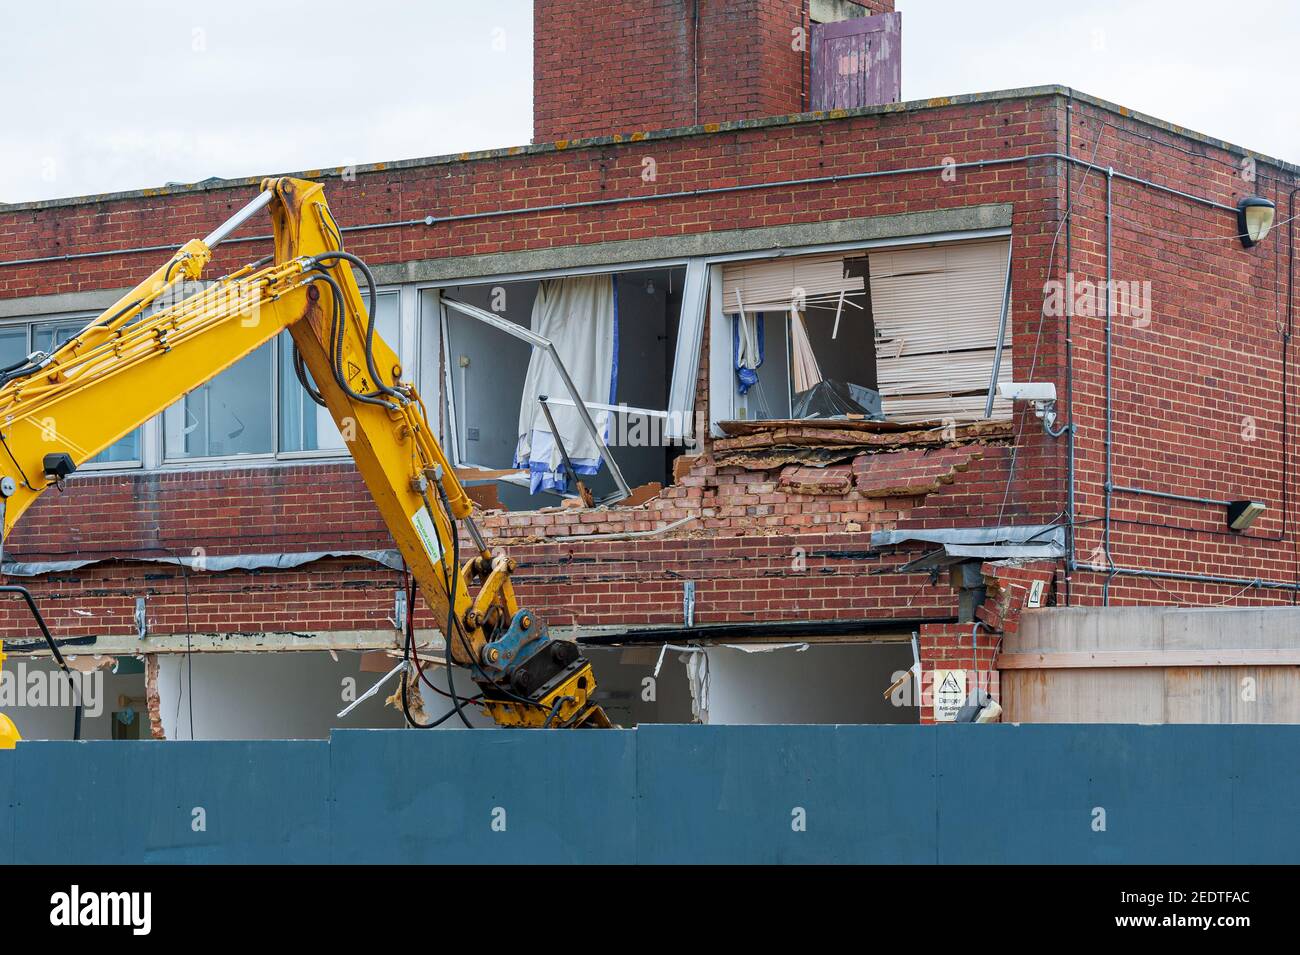 Demolition of an old building with a long reach machine hydraulic jaw. Regeneration of a space for new, modern building. Stock Photo